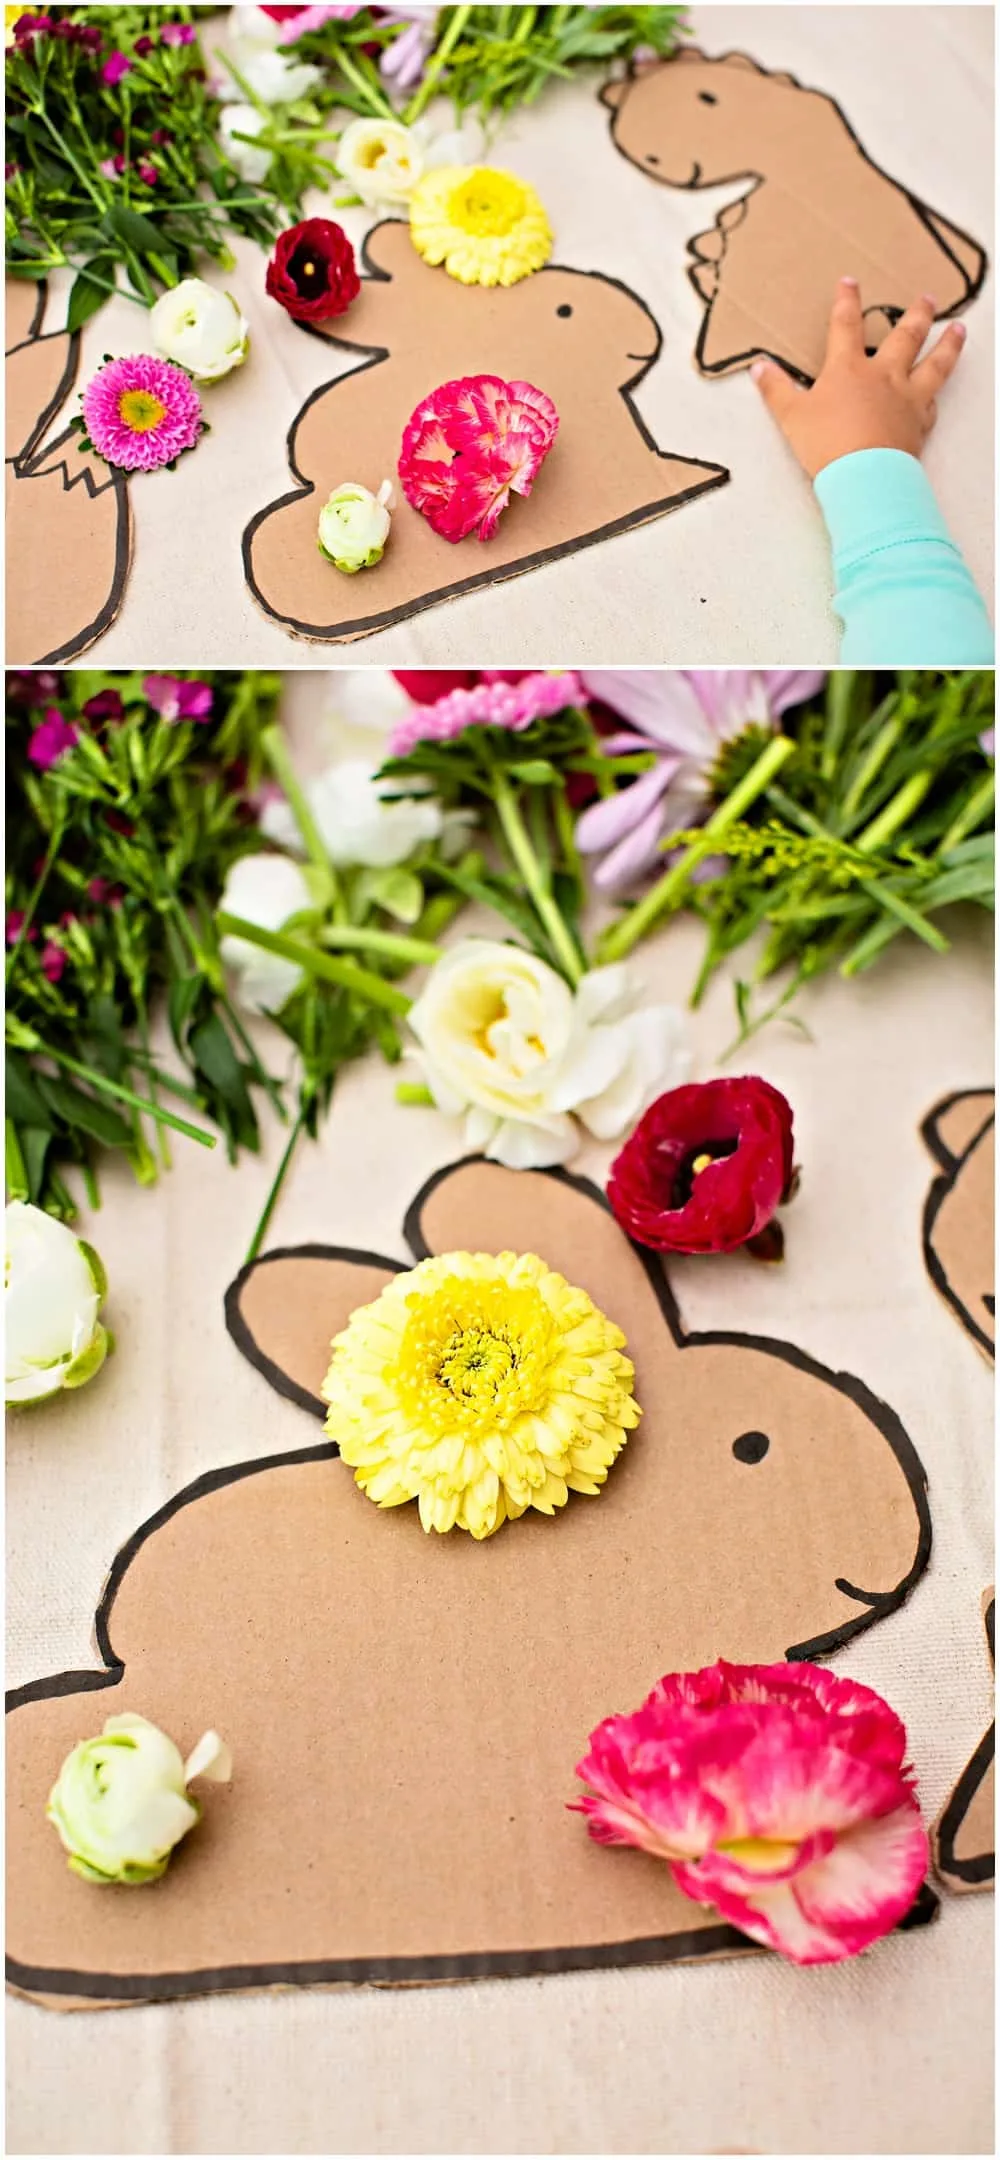 outdoor nature craft activity with flowers for kids